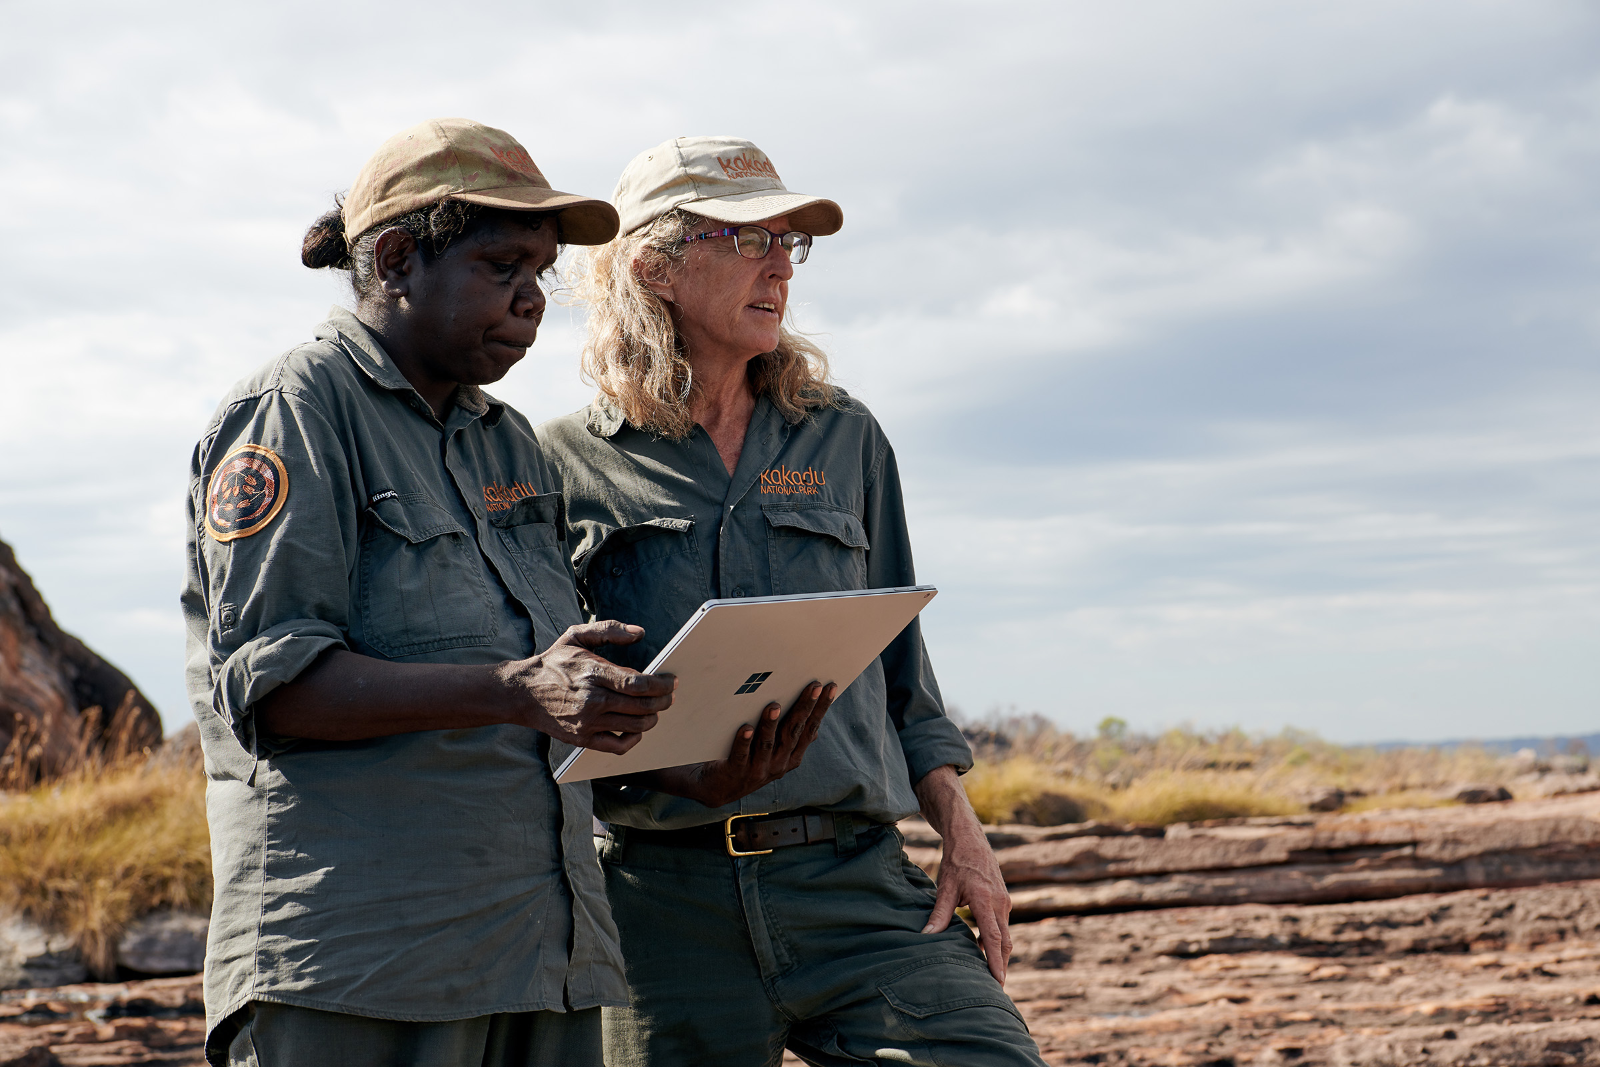 Rangers Serena McCartney and Annie Taylor stand on rocky country looking out over a floodplain and also looking at a Microsoft tablet showing the results of their para grass management on floodplains in Kakadu.